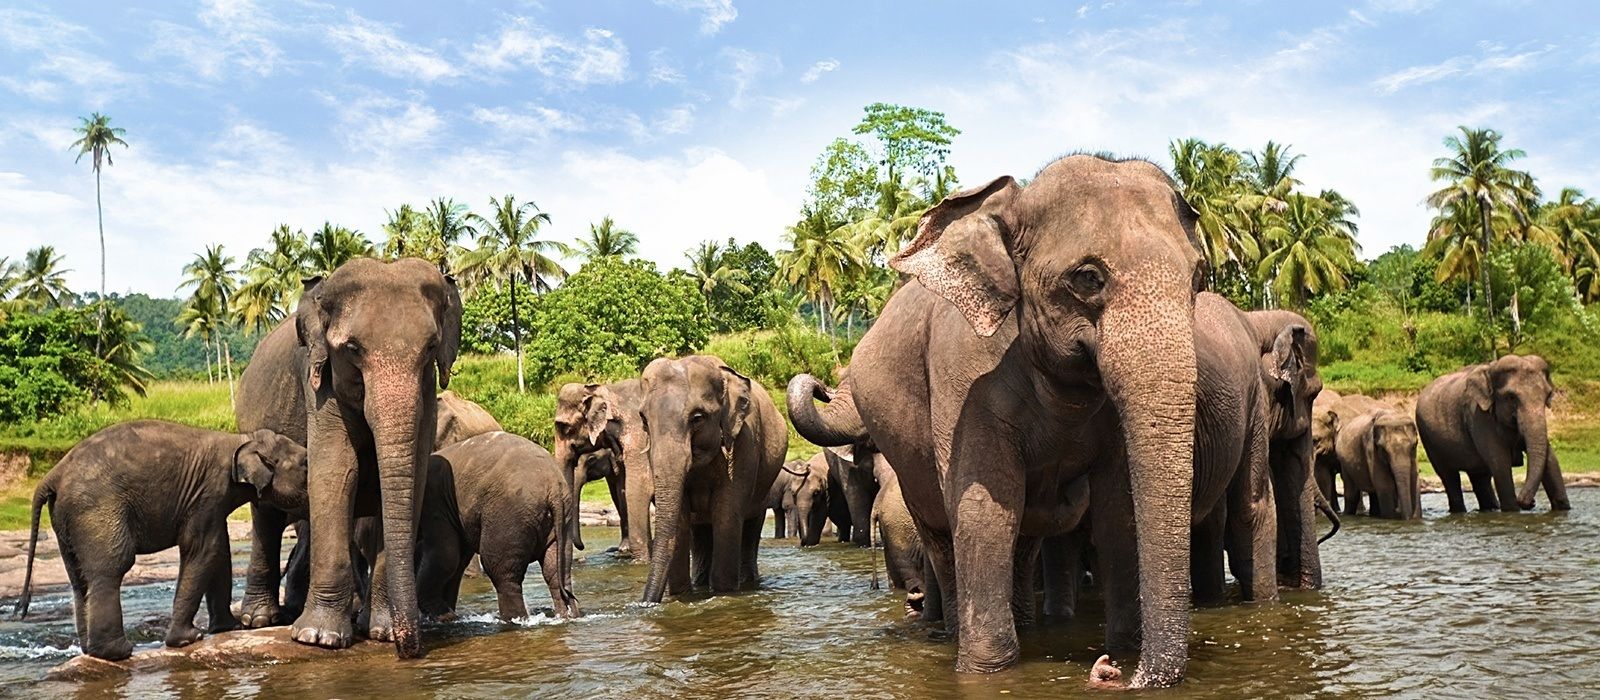 Wildlife Experiences in Sri Lanka That Should Not Be Missed